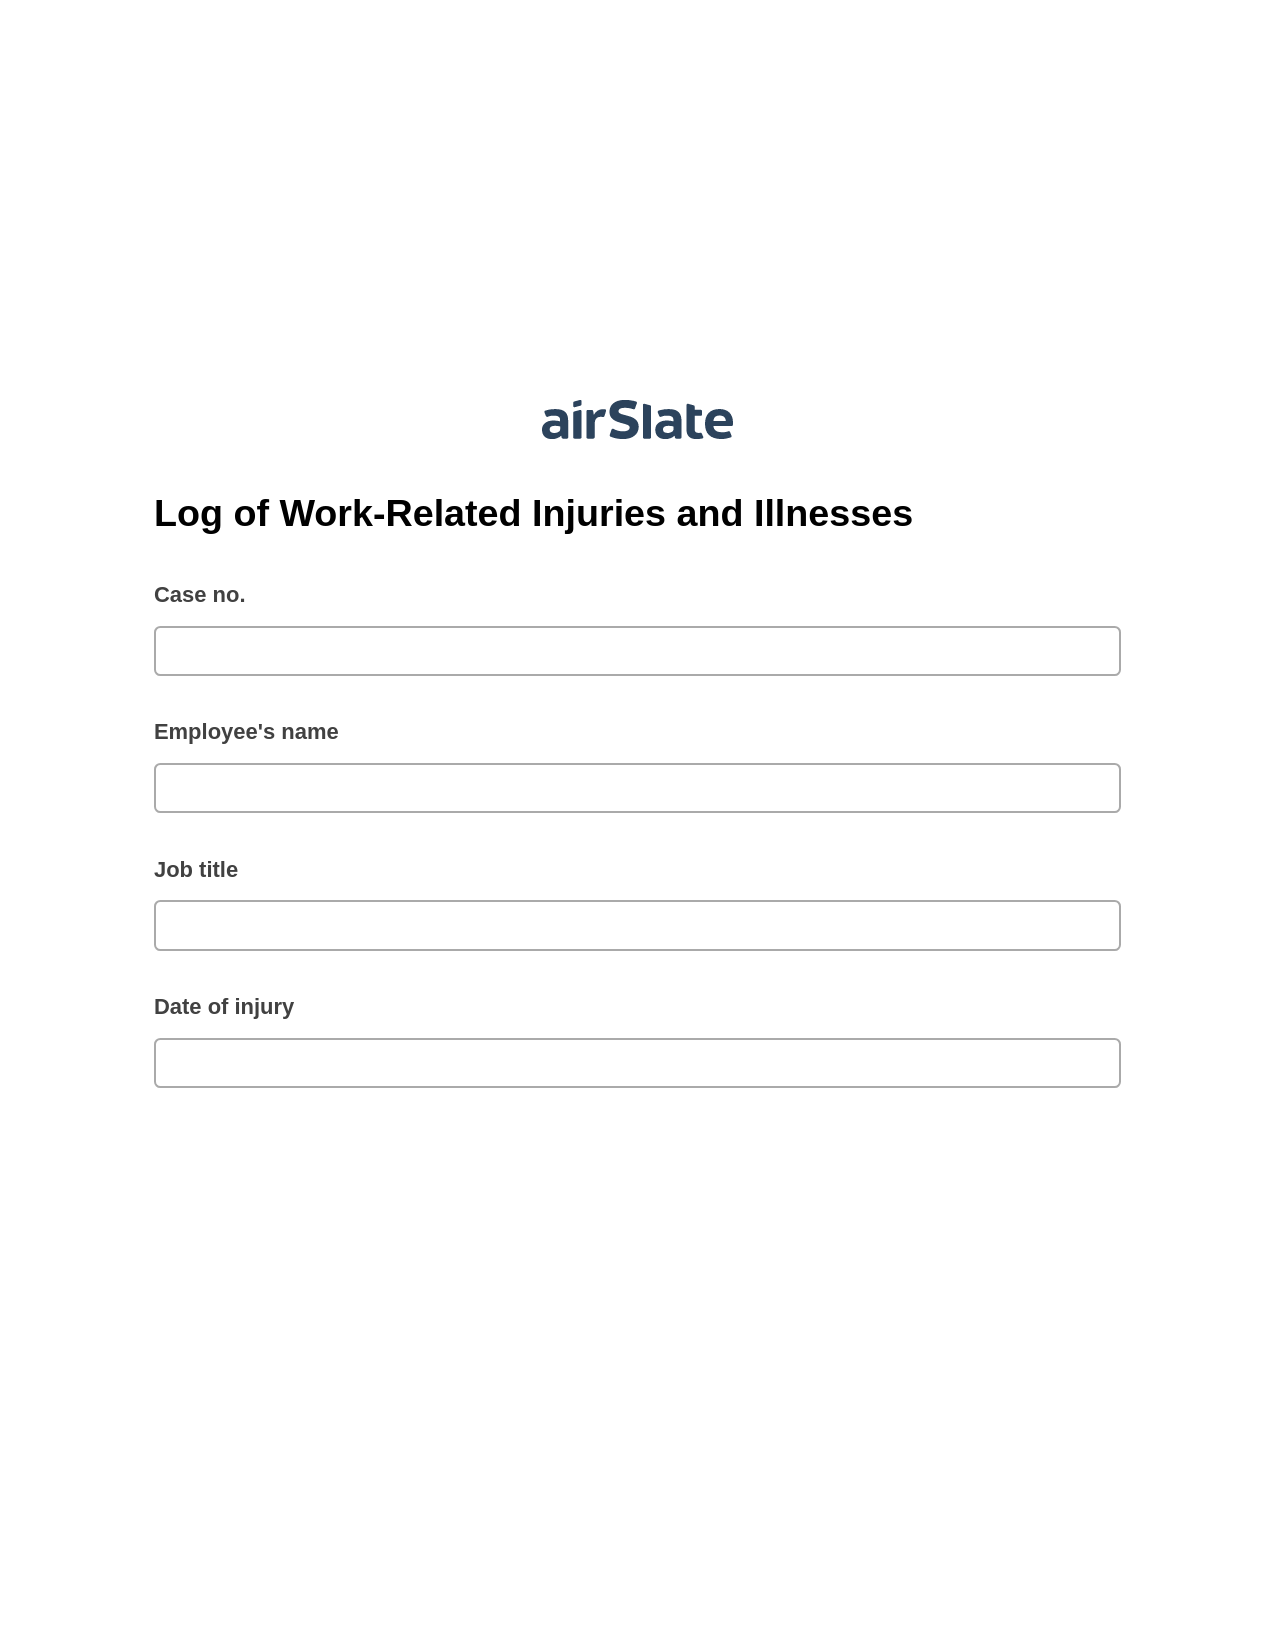 Log of Work-Related Injuries and Illnesses Pre-fill Slate from MS Dynamics 365 Records Bot, Assign Slate Name Bot, Export to Google Sheet Bot